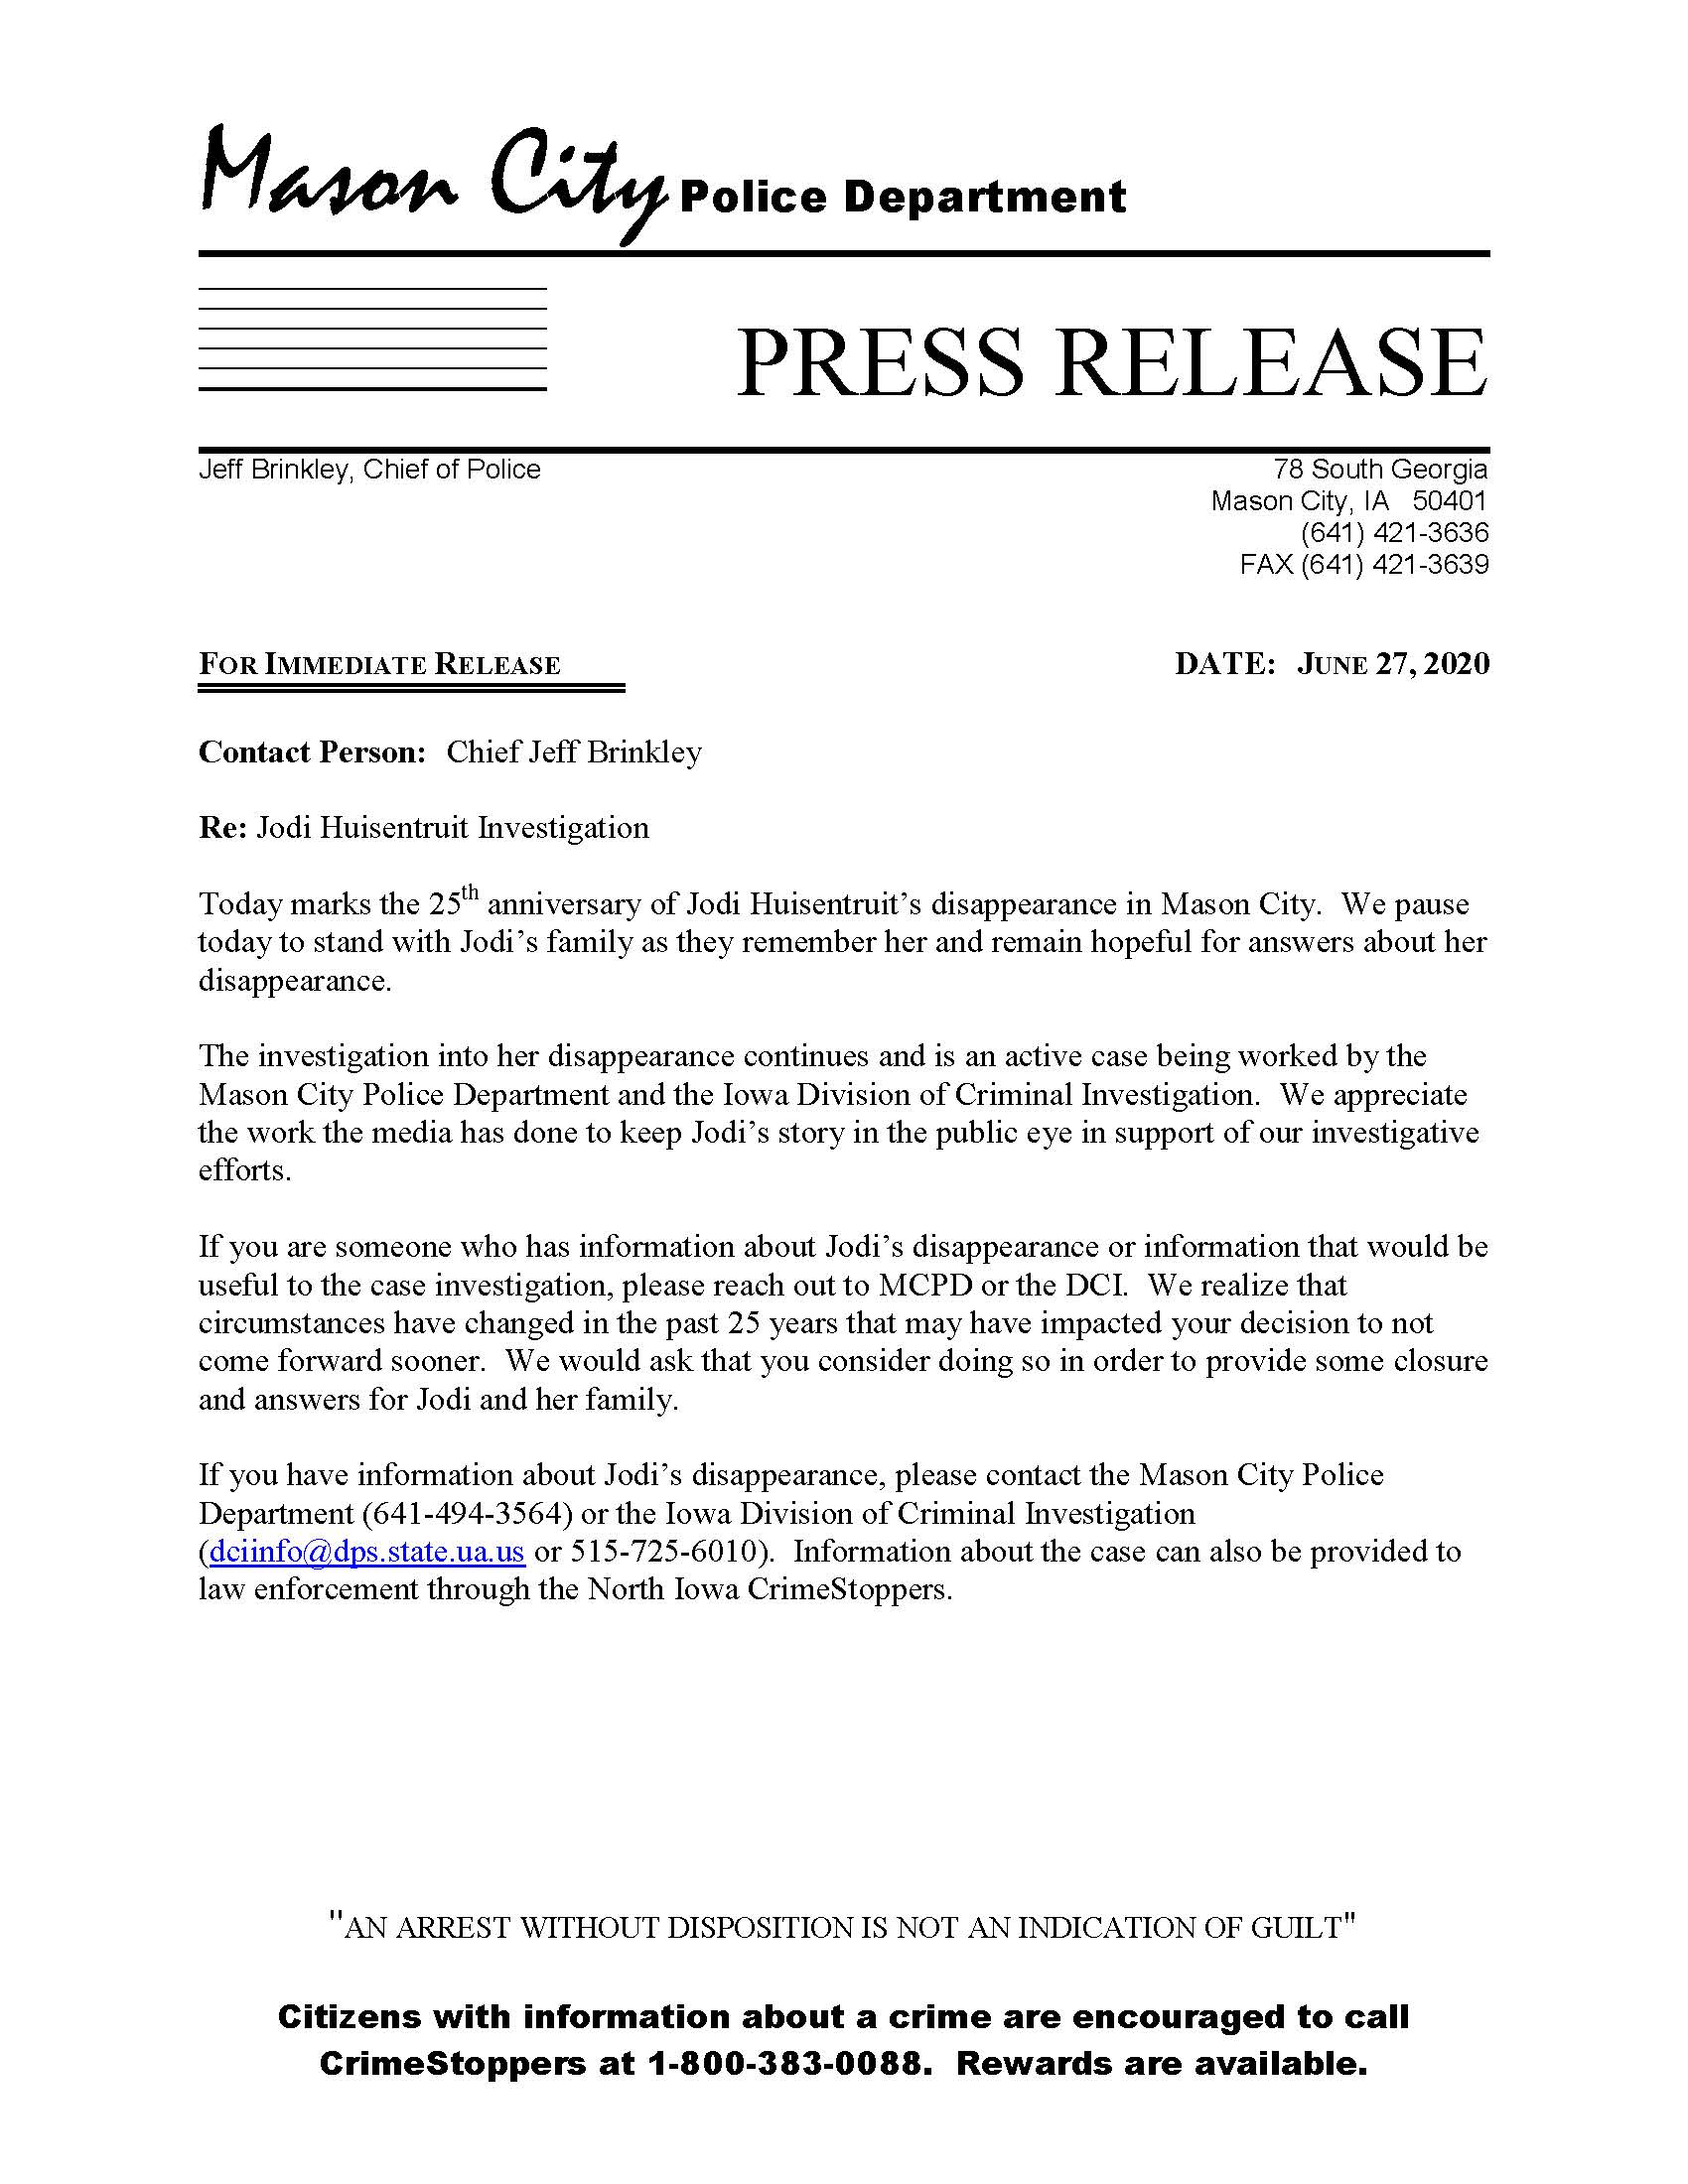 Link to press release on 25 anniversary of the disappearance of Jodi Huisentruit.